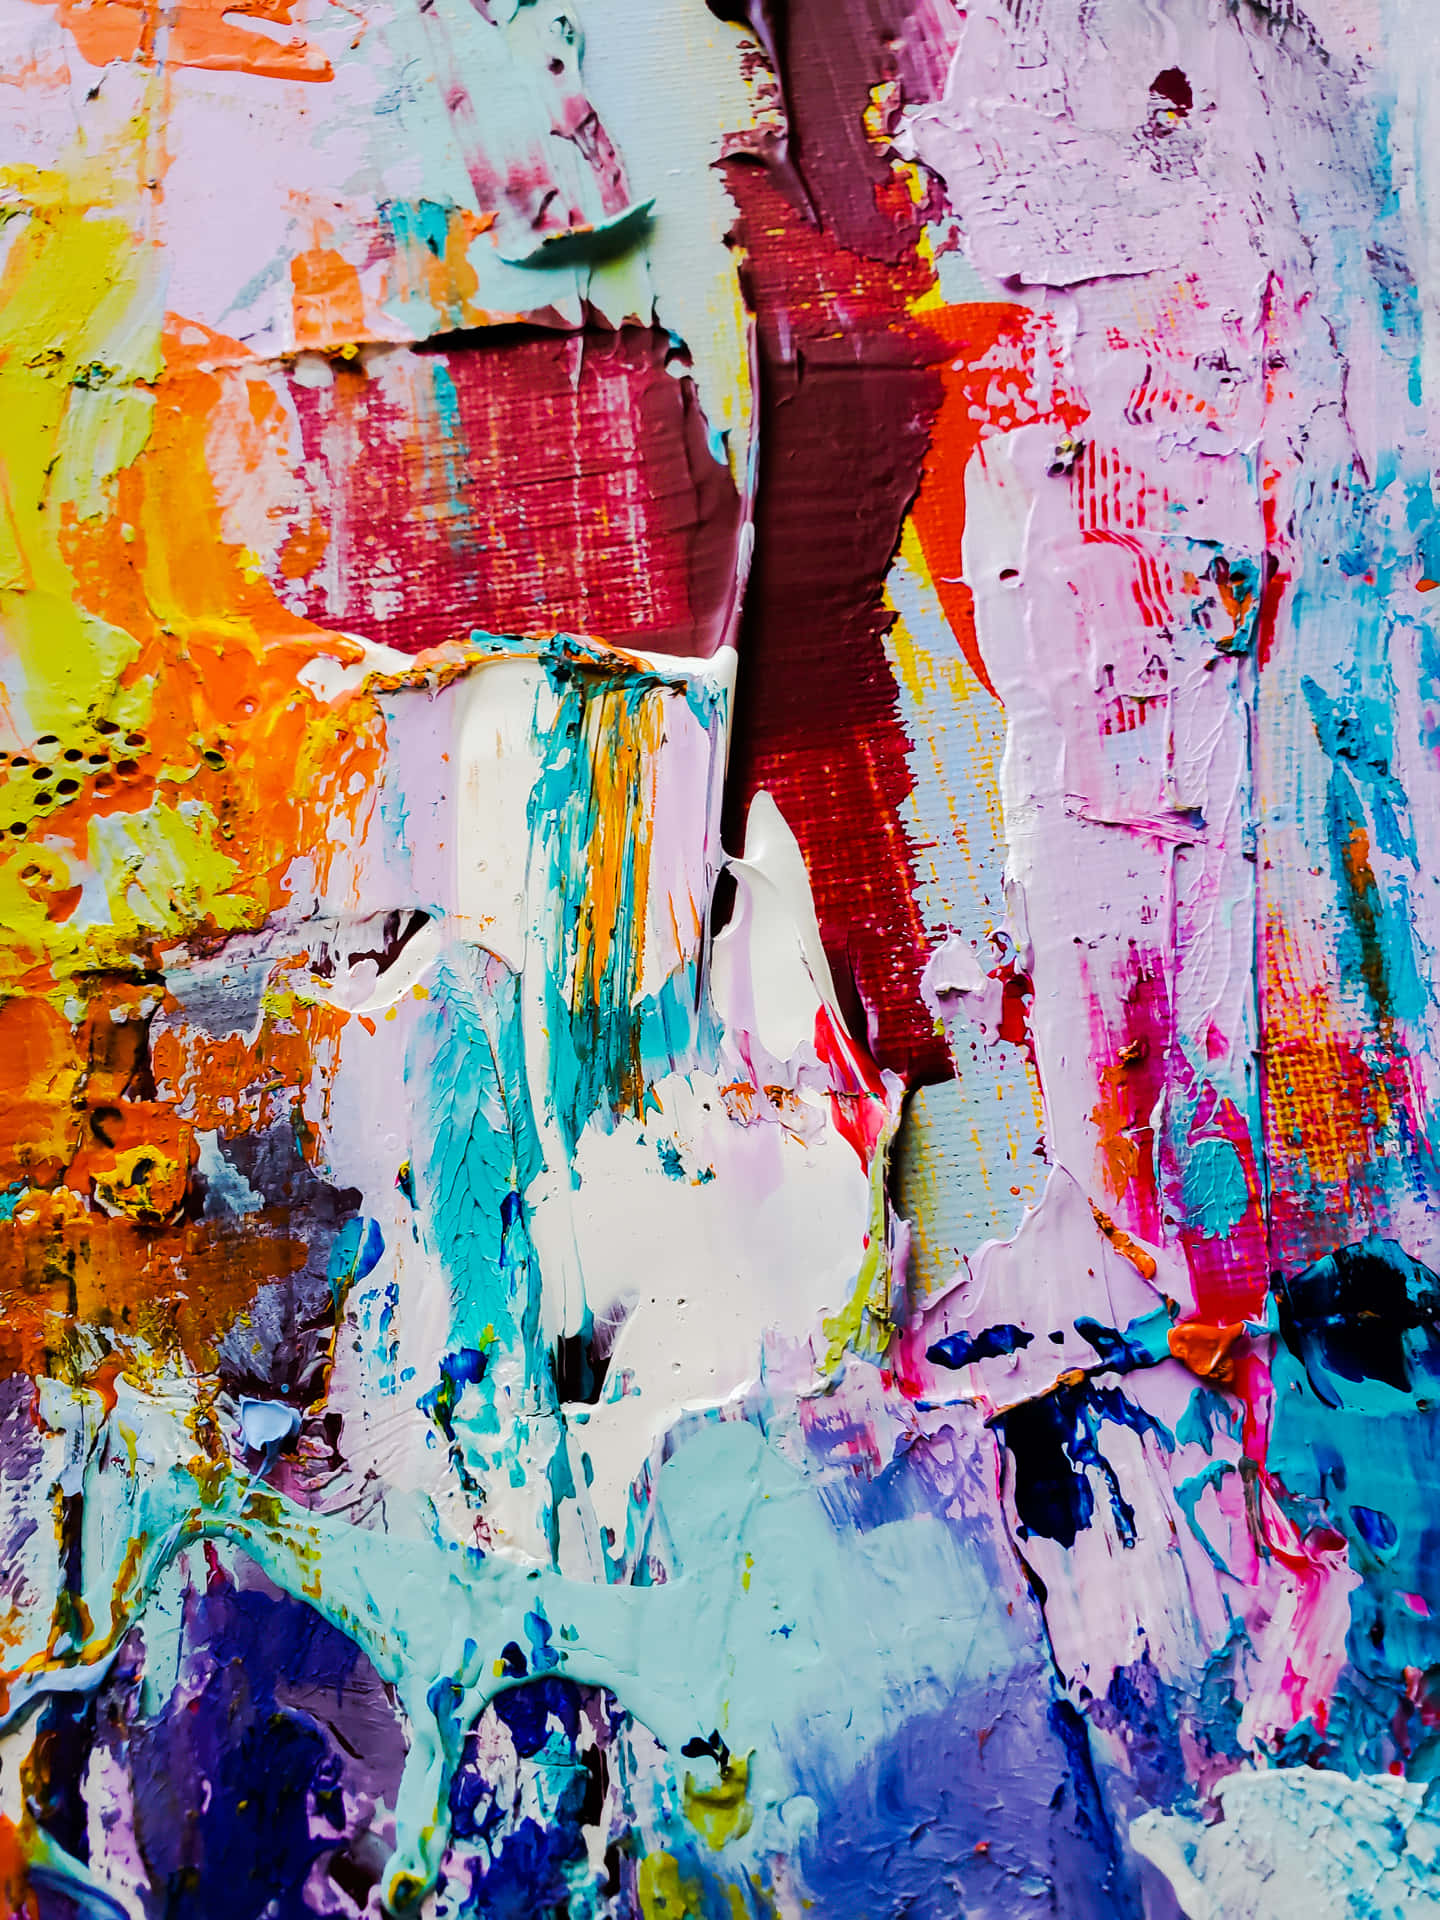 Let Your Imagination Run Wild With This Colorful Abstract Art